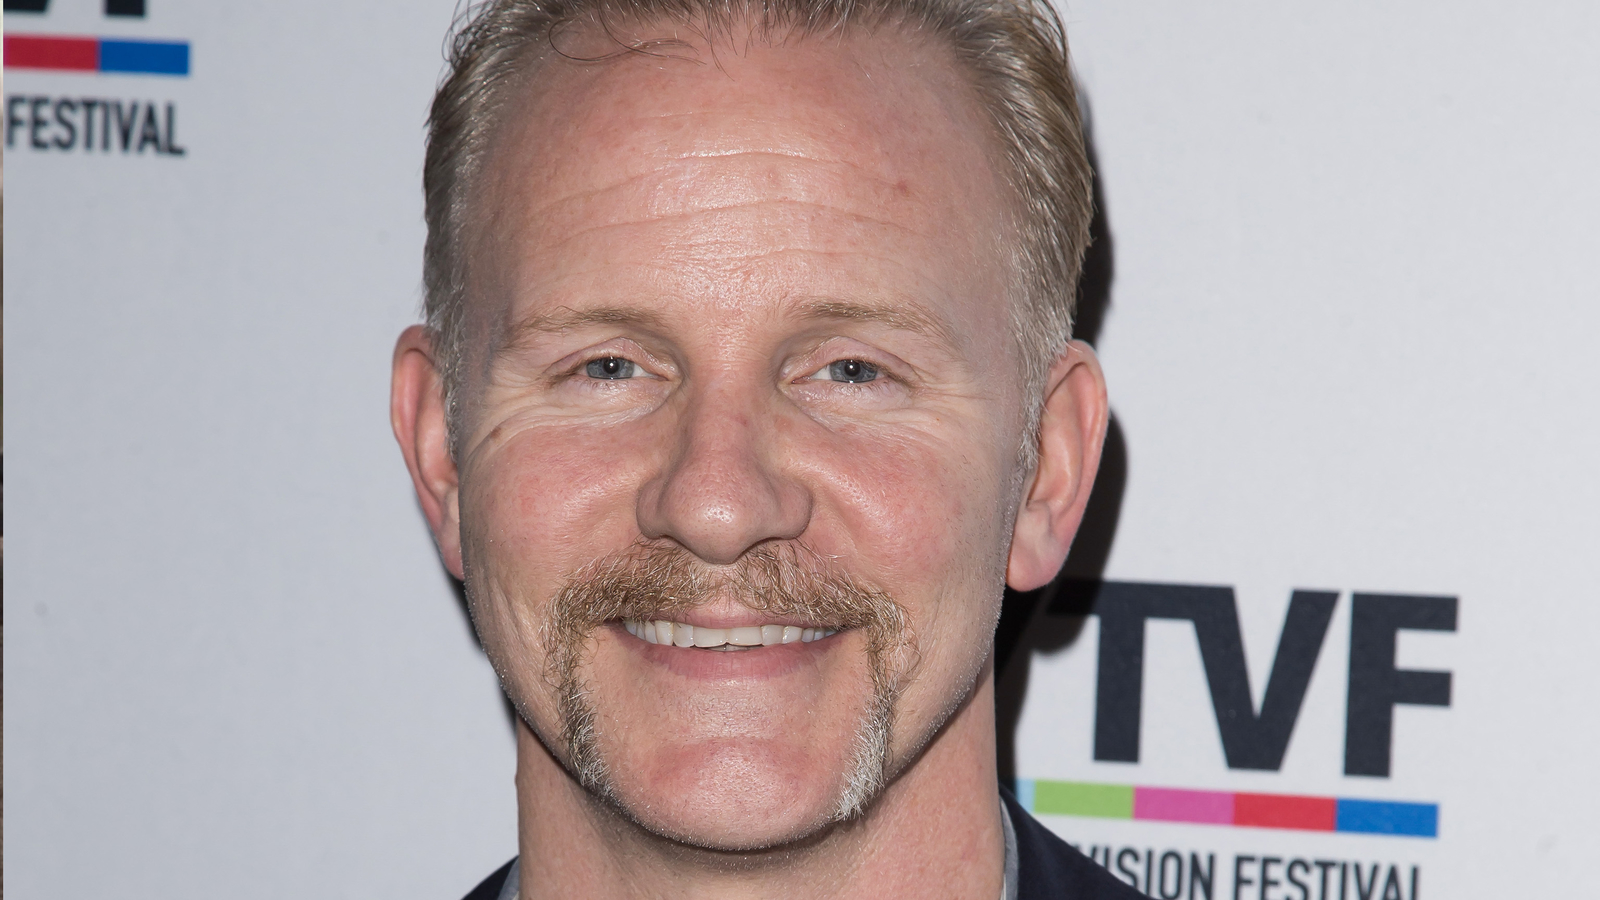 Morgan Spurlock death: Documentary filmmaker known for ‘Super Size Me’ dies at 53 from cancer complications, family says [Video]